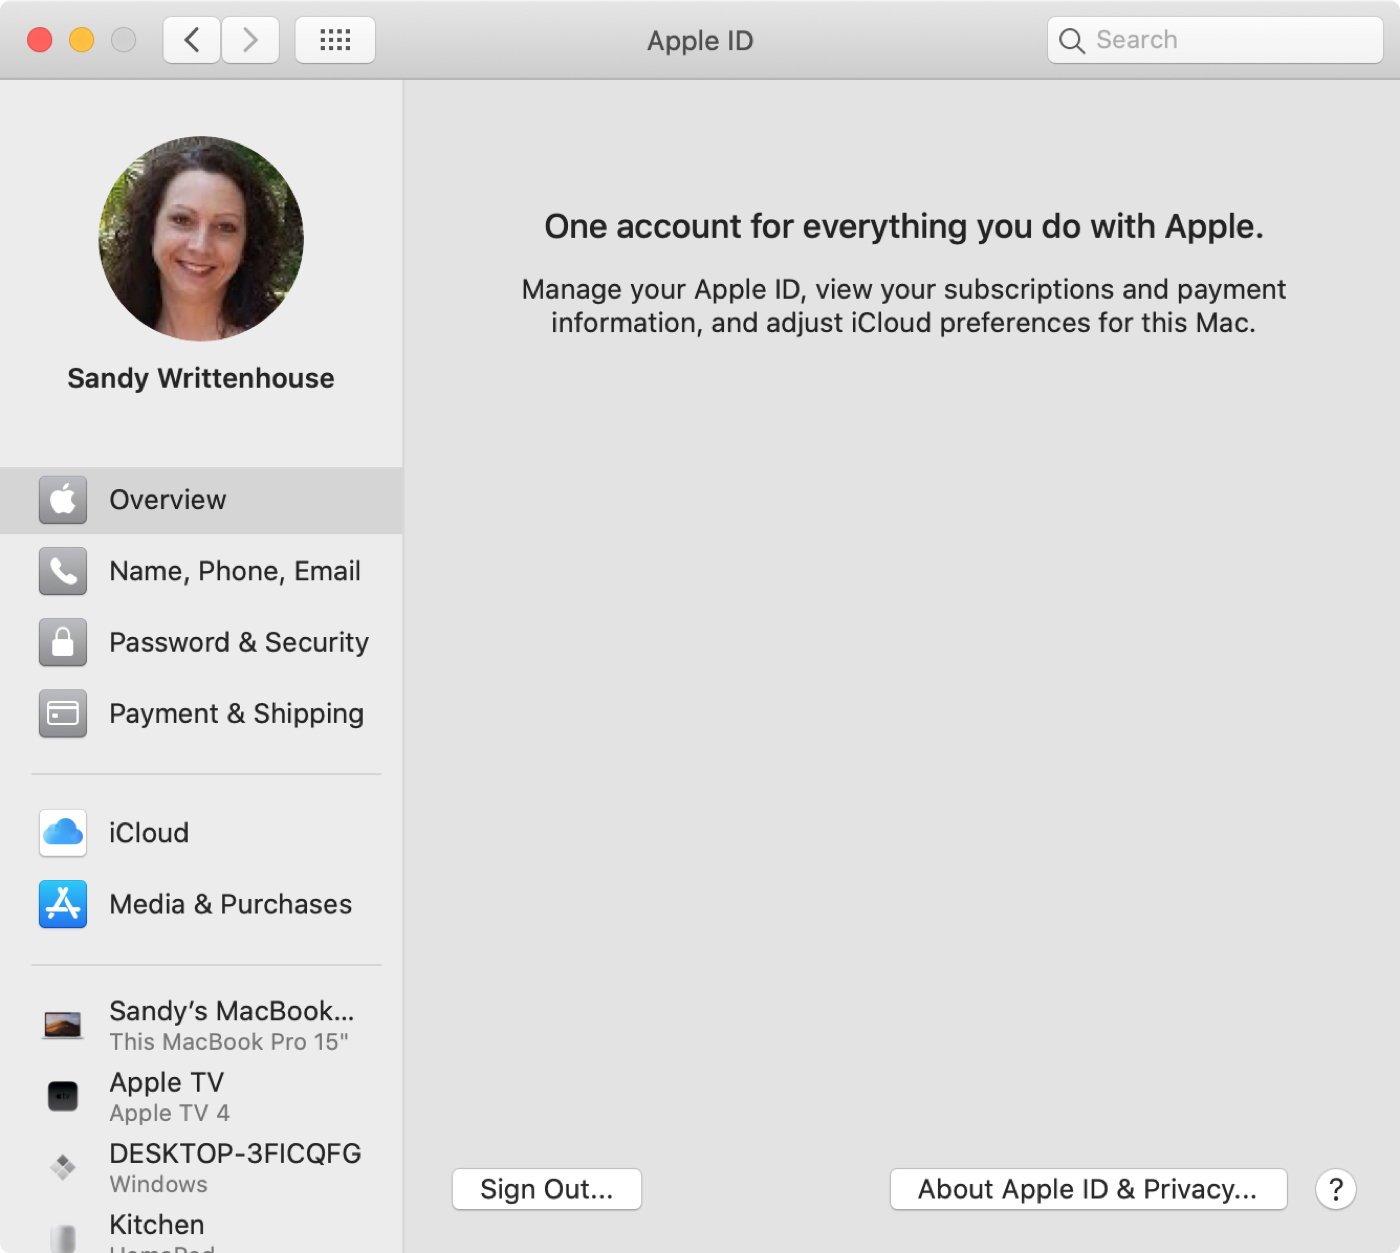 Apple ID Overview